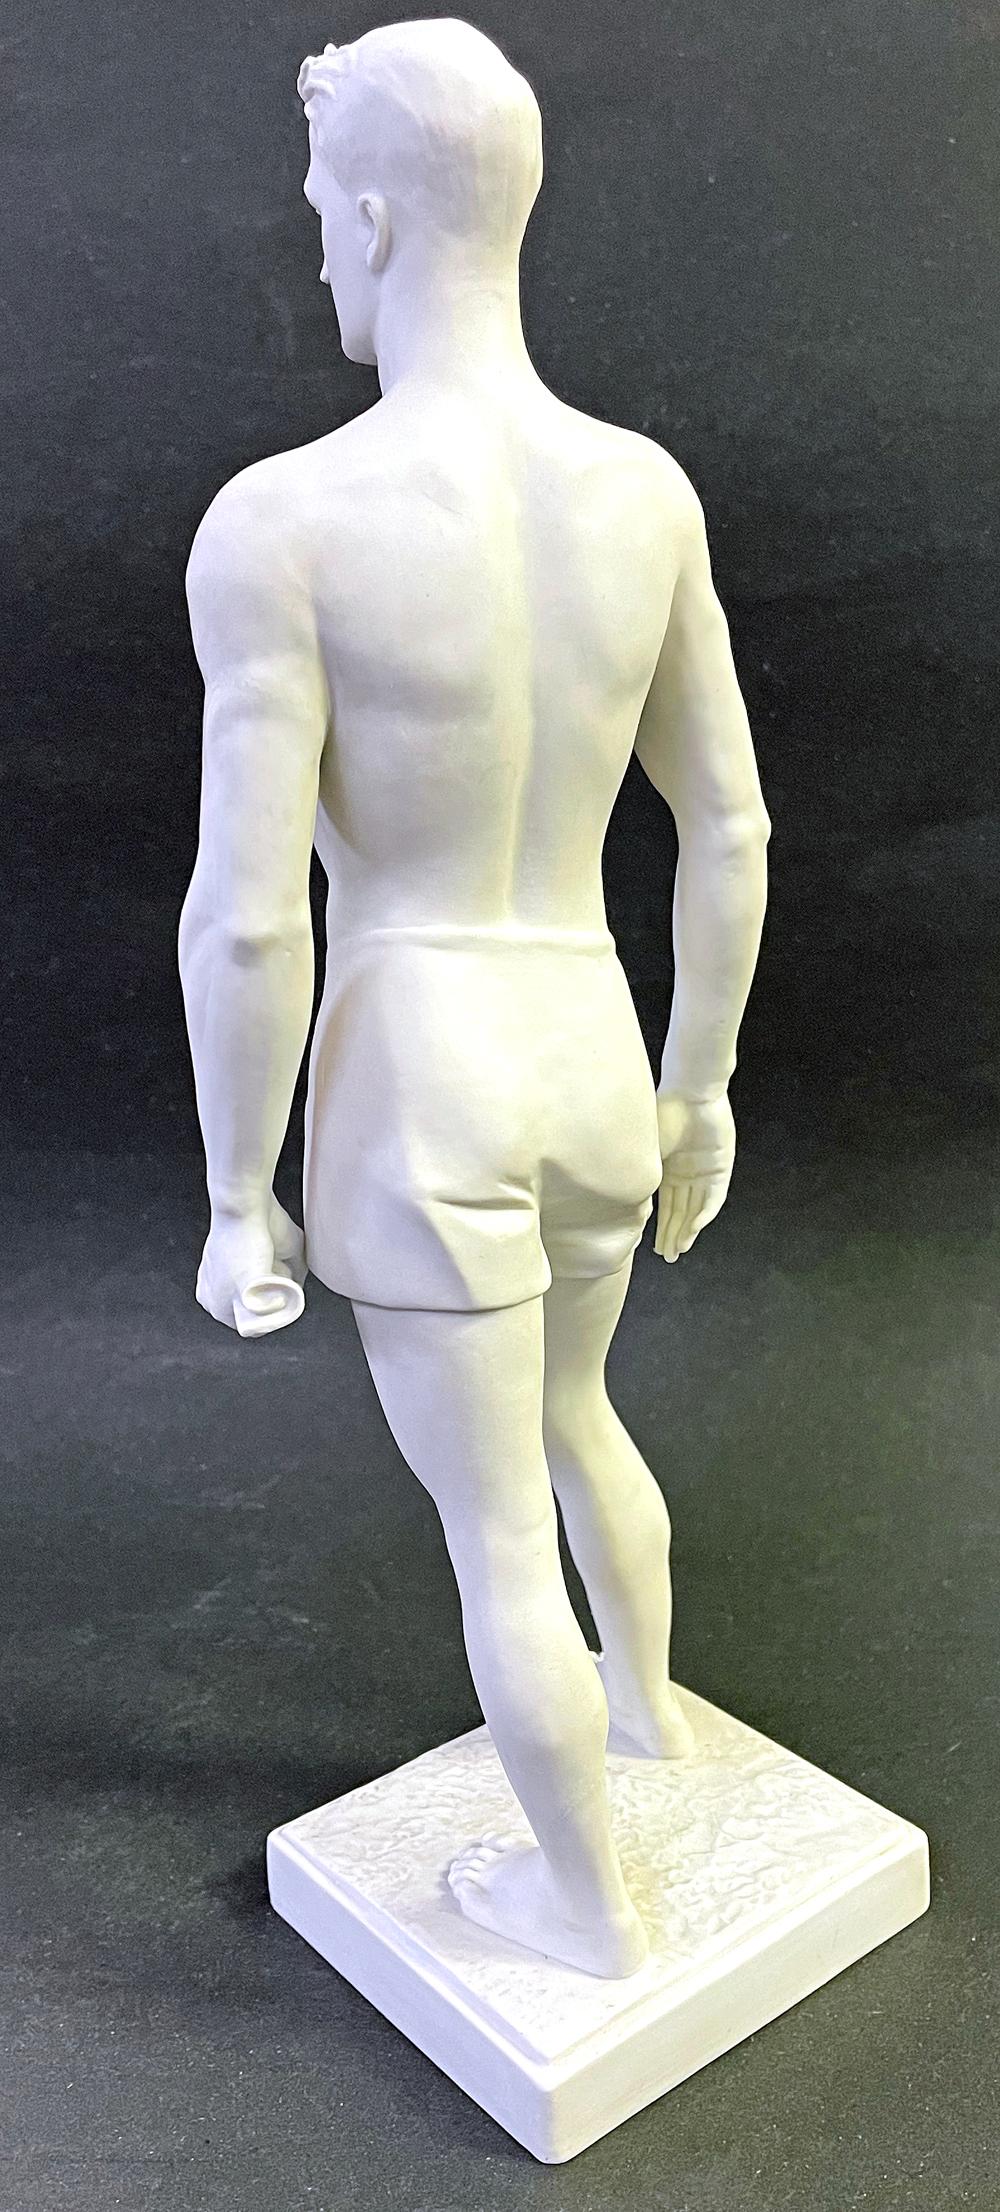 In the early decades of the 20th century, much of Europe and North America's artists worked to idealize the human figure, often showing noble men at work or in competition.  This figure by Franz Nagy for Allach porcelain had a much more overt